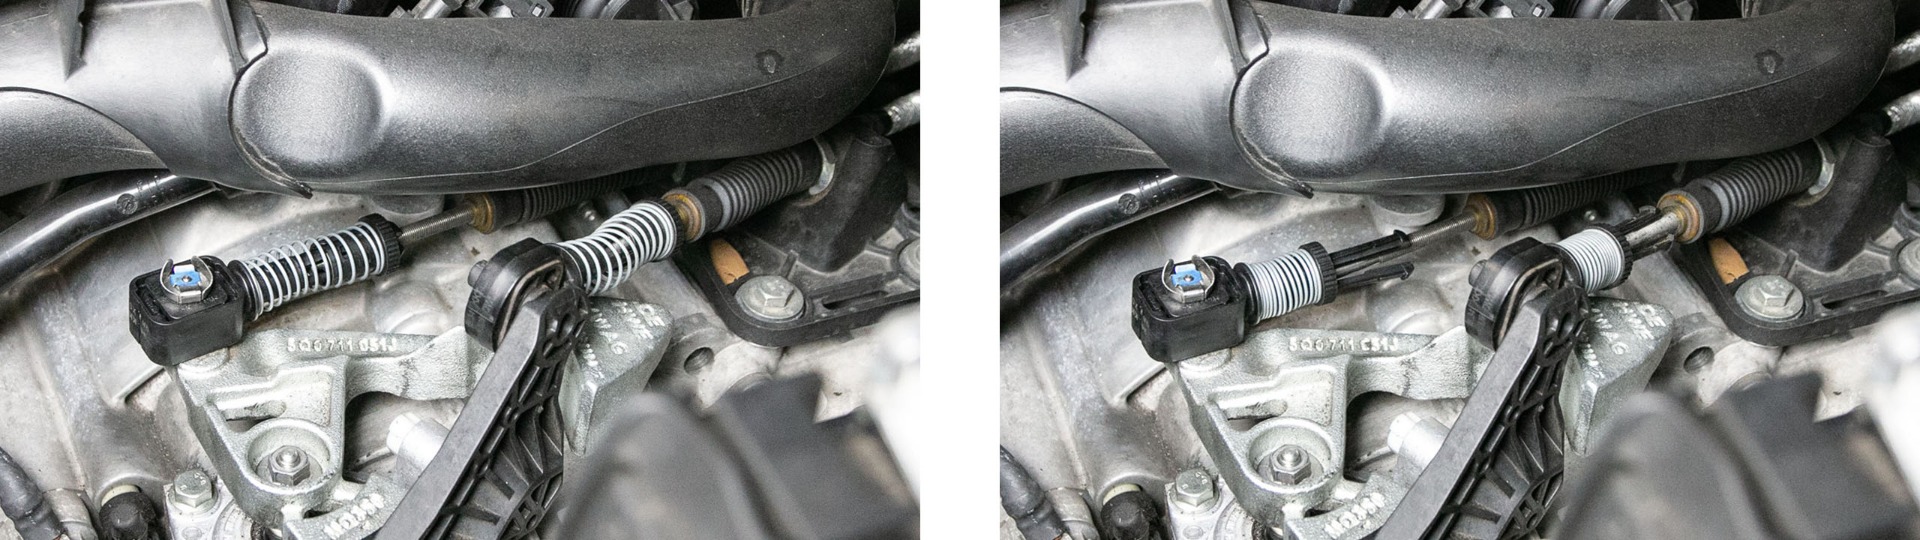 How to remove Shifter End Links for 6 Speed Short Shifter Install